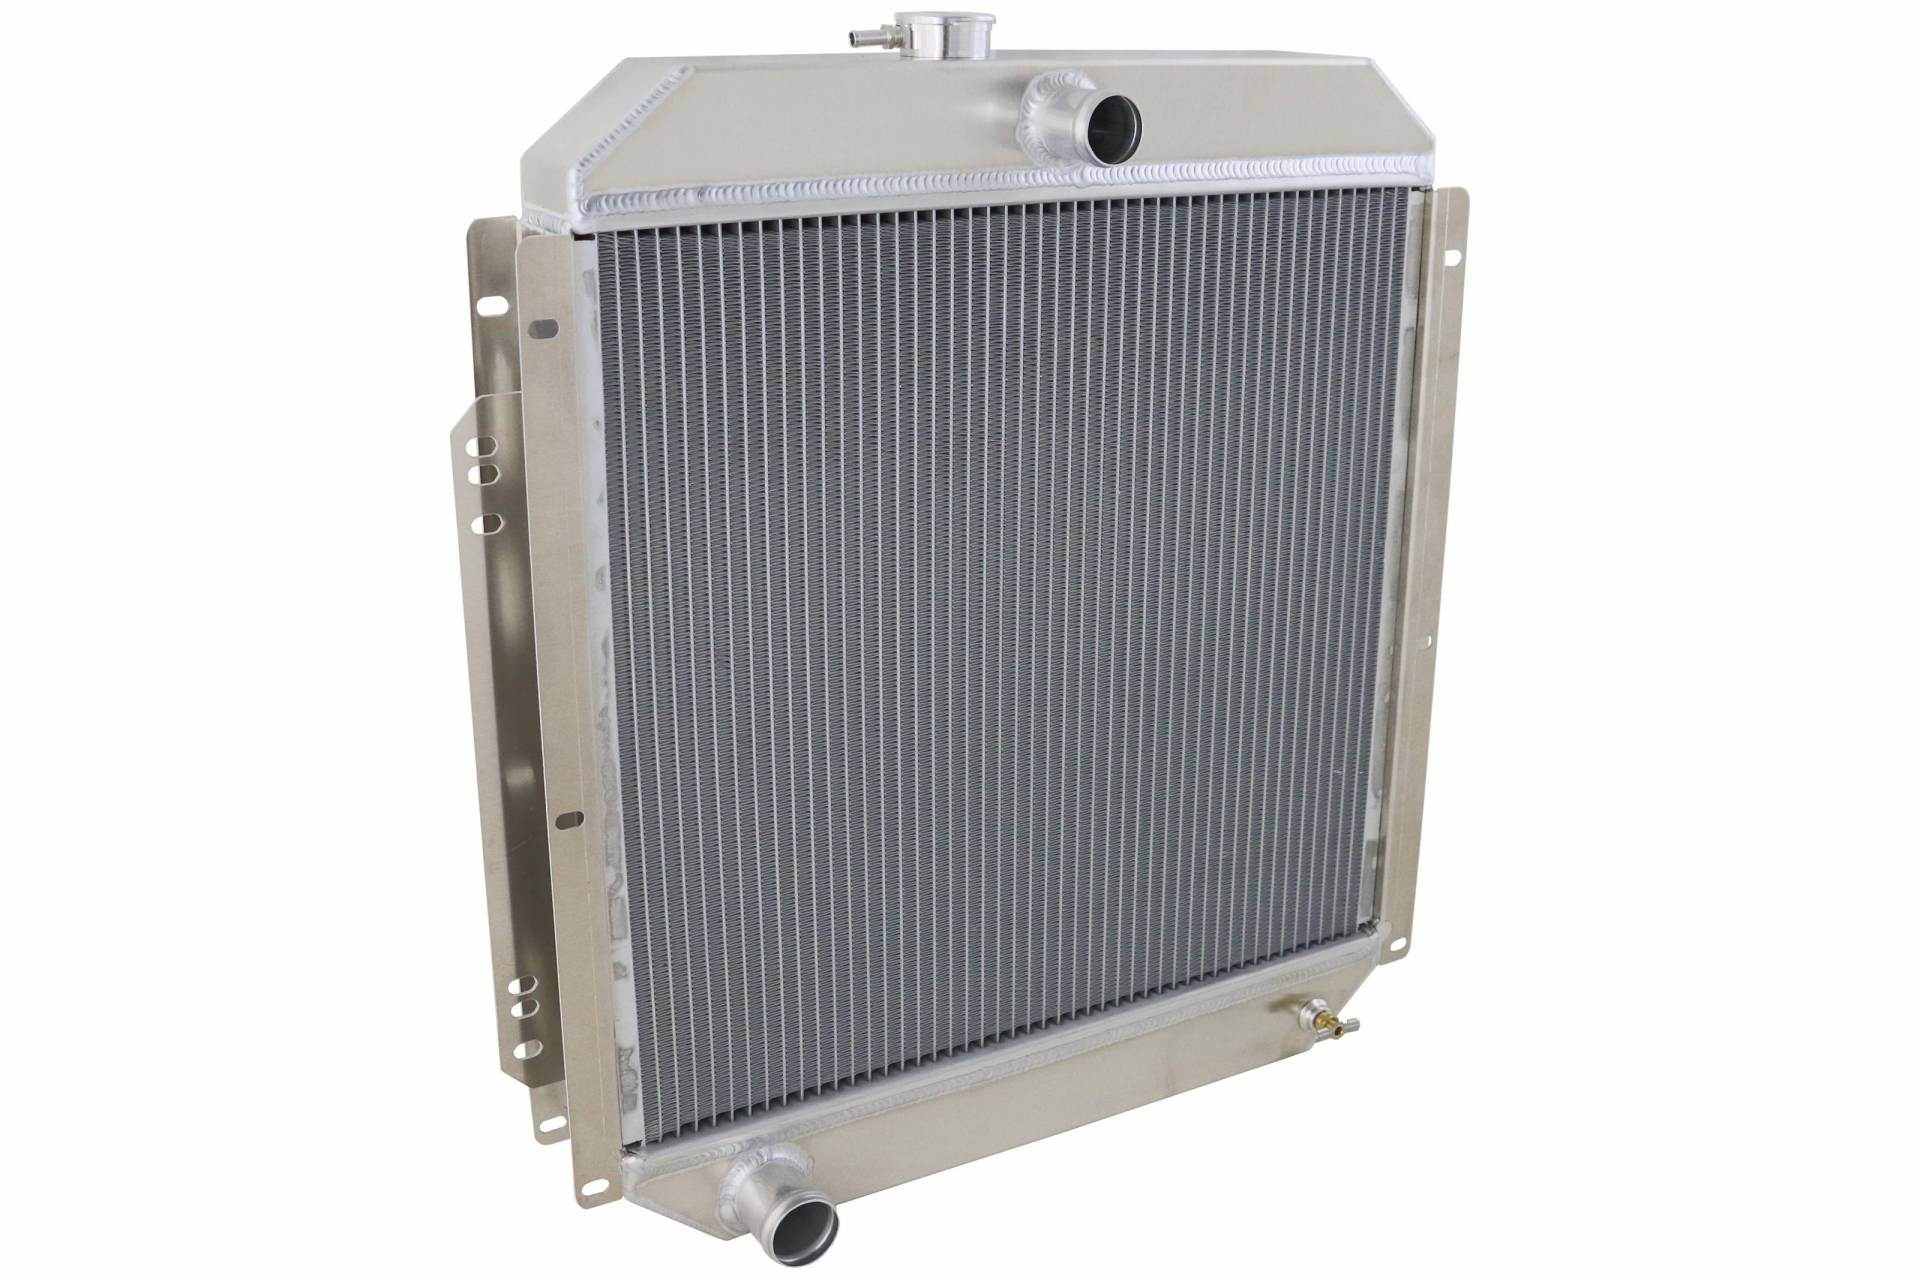 Wizard Cooling Inc - Wizard Cooling - 1953-1956 Ford Trucks Aluminum Radiator - 98502-200